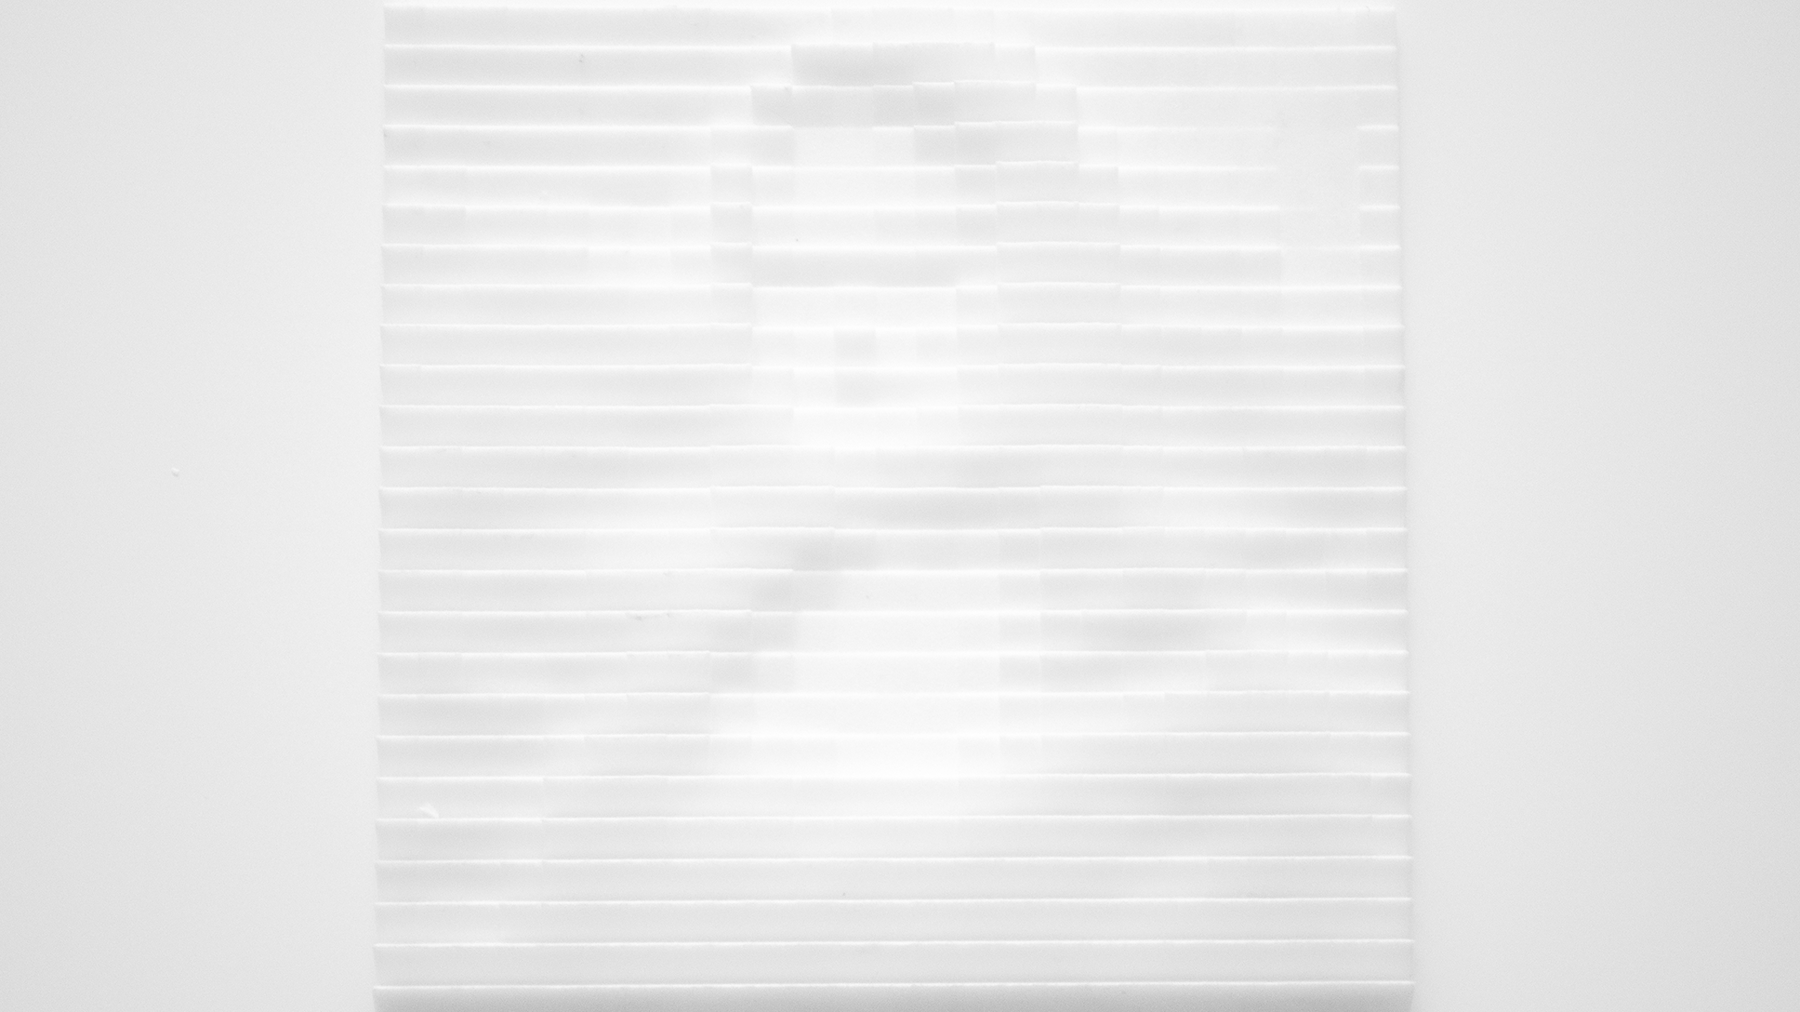 An 3d model of a white plate that has a matrix of squared surfaces all inclined differently. The different angles change the intensity of the light reflection which lead to a pixel effect. From far away it looks like the a black and white pixelated version of the mona lisa